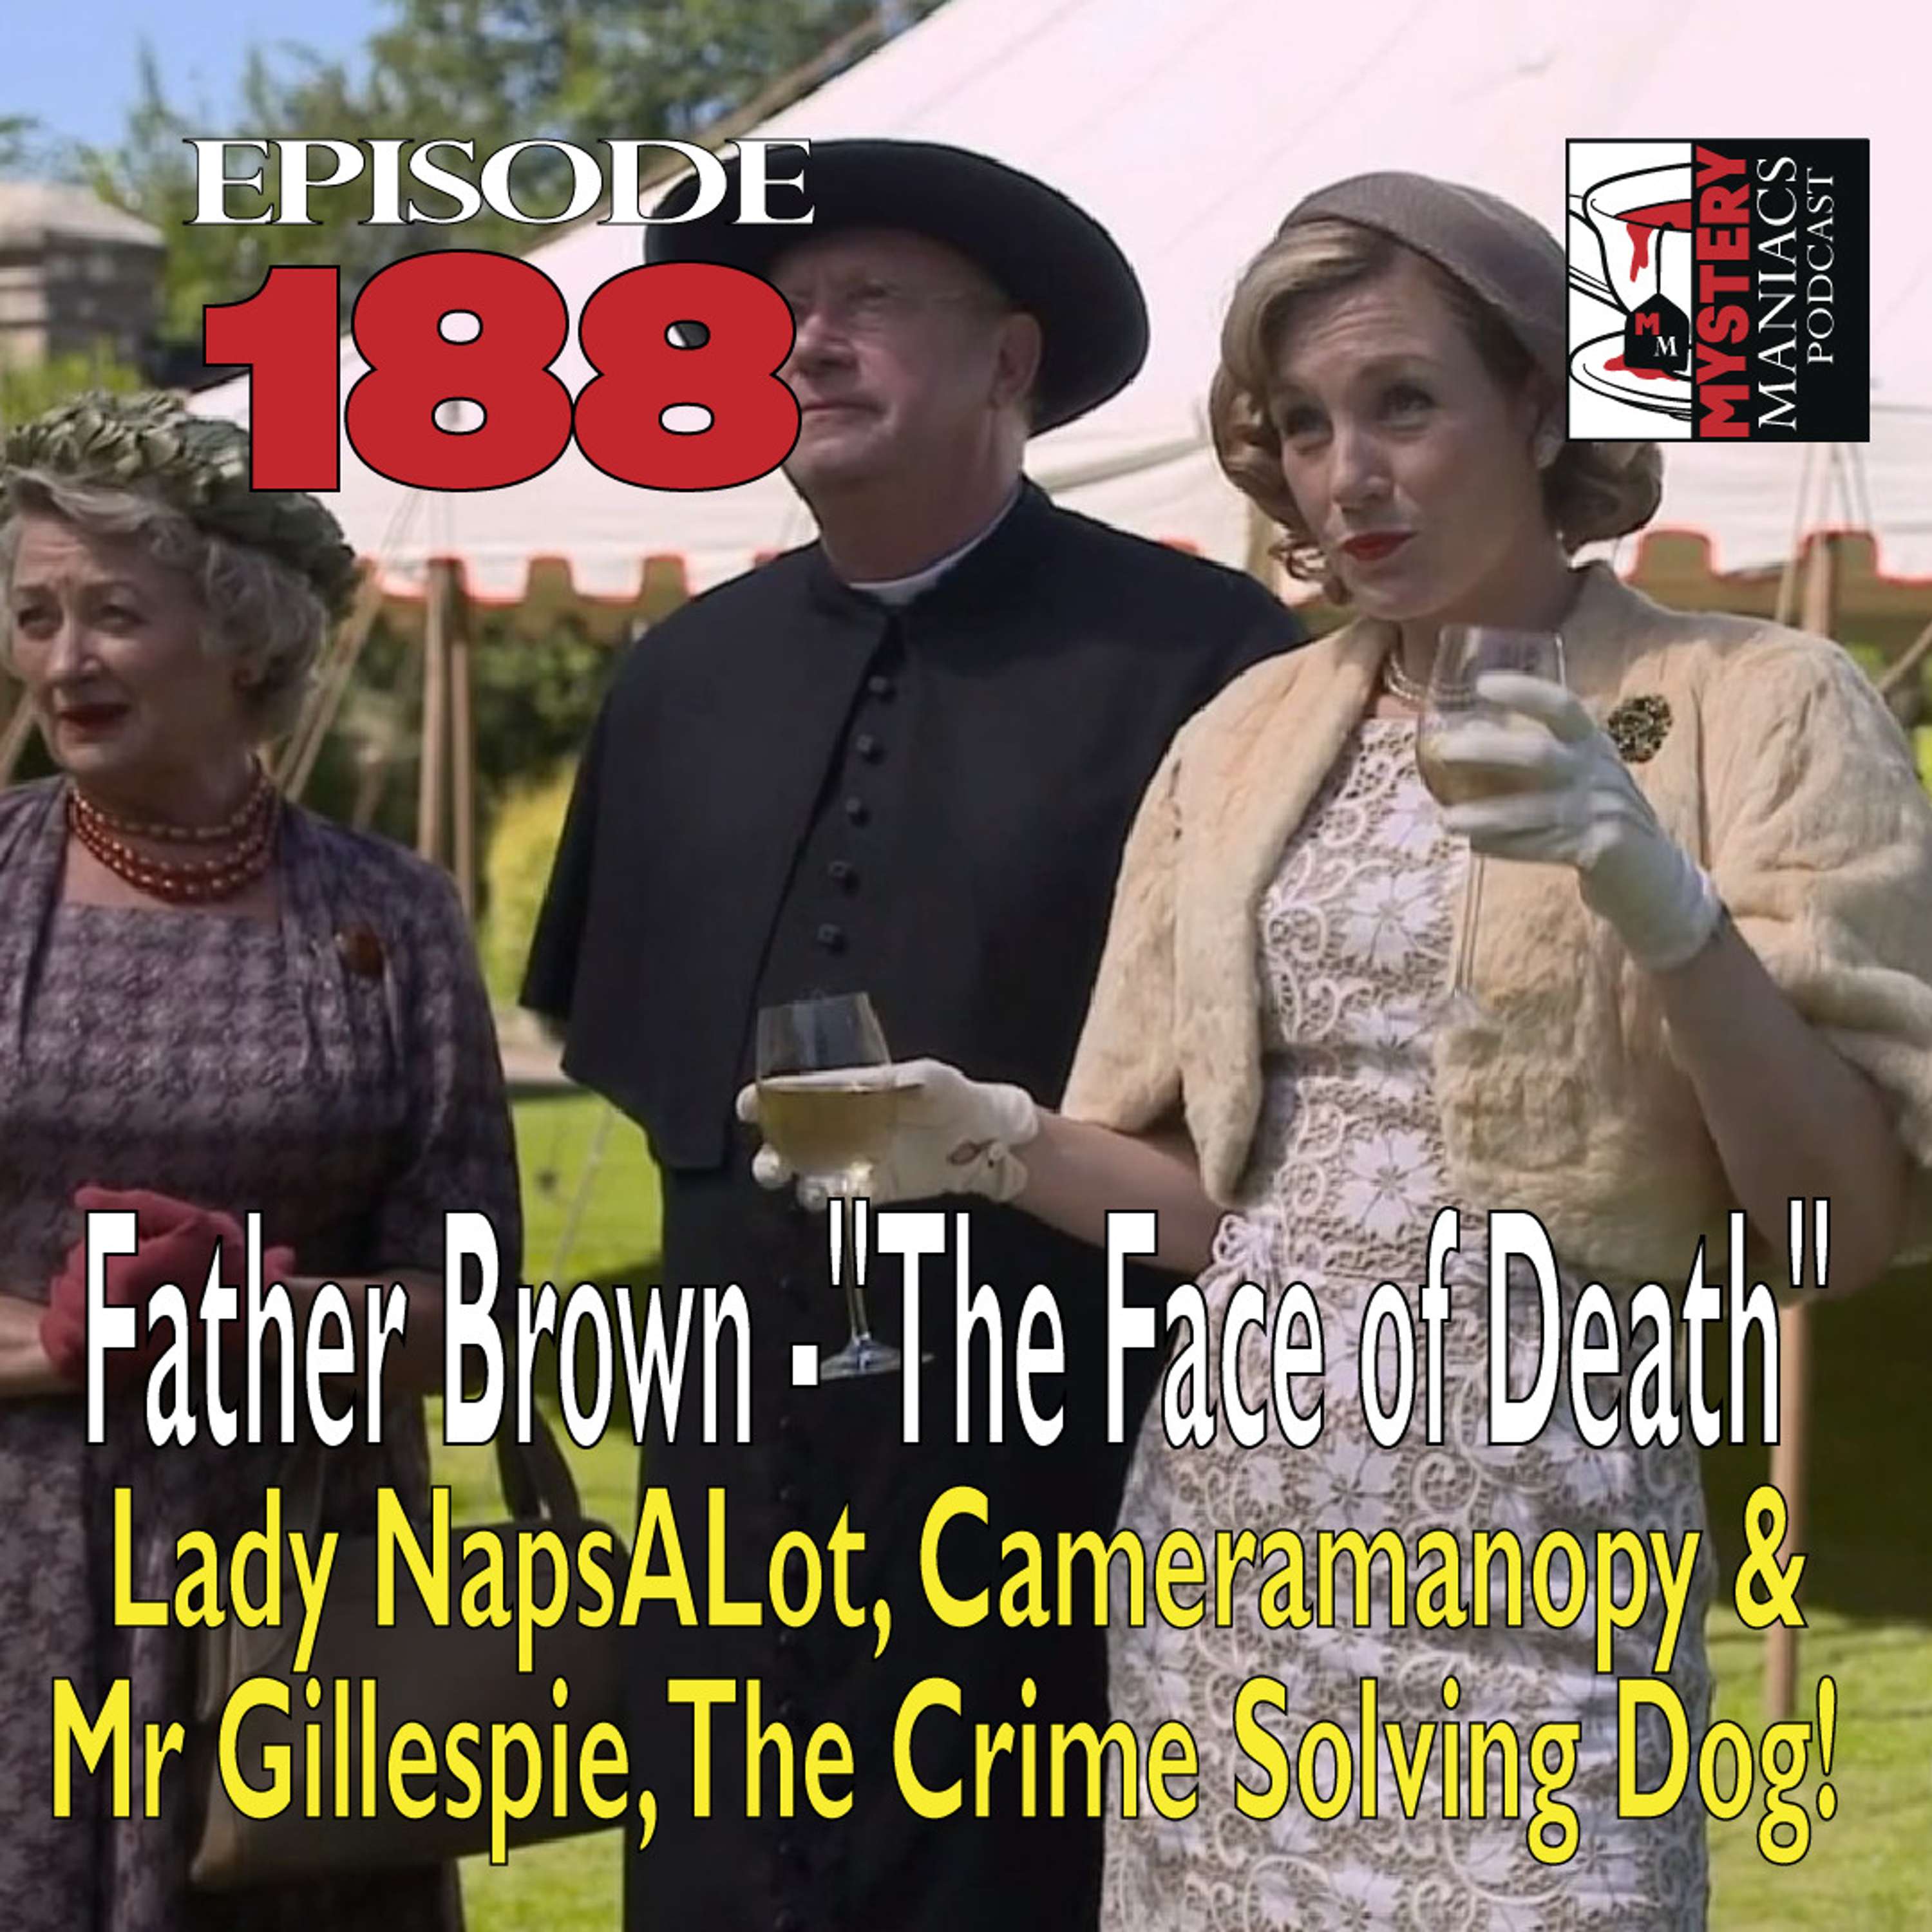 Episode 188 - Father Brown - 